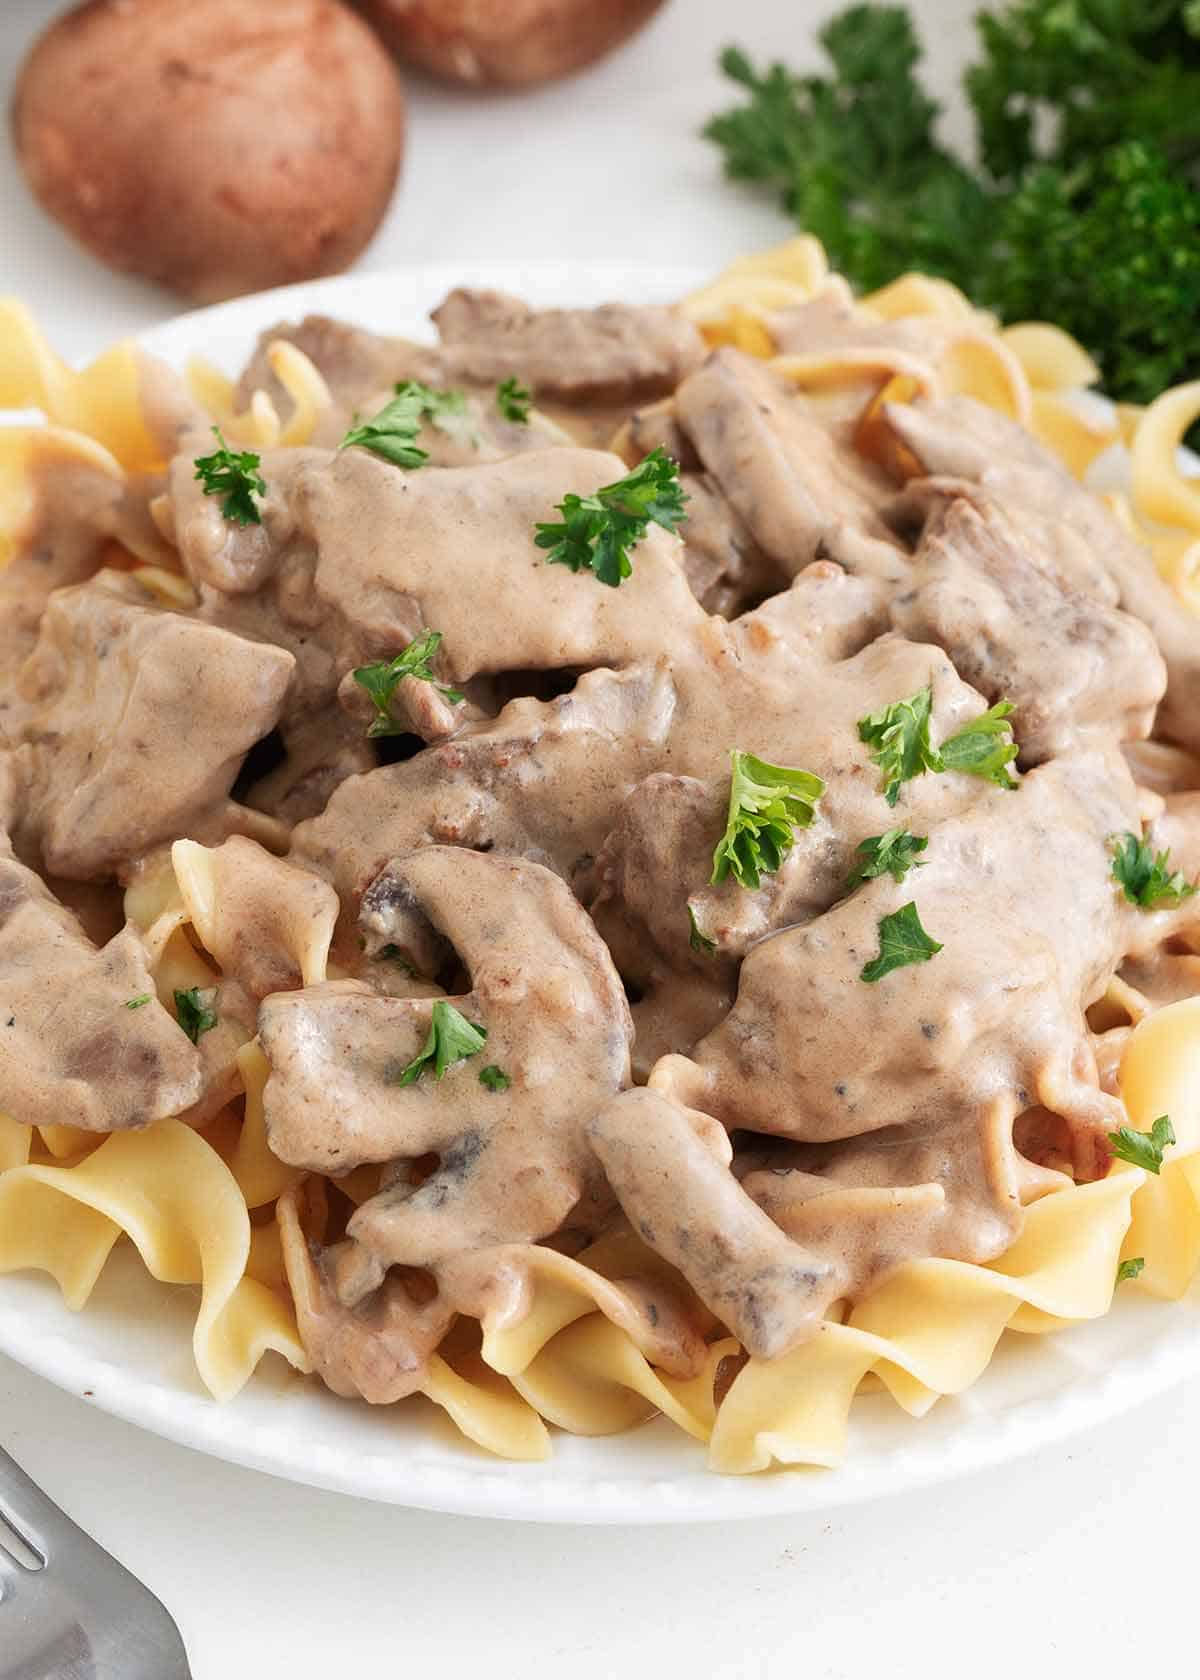 Beef stroganoff over noodles in a white bowl.